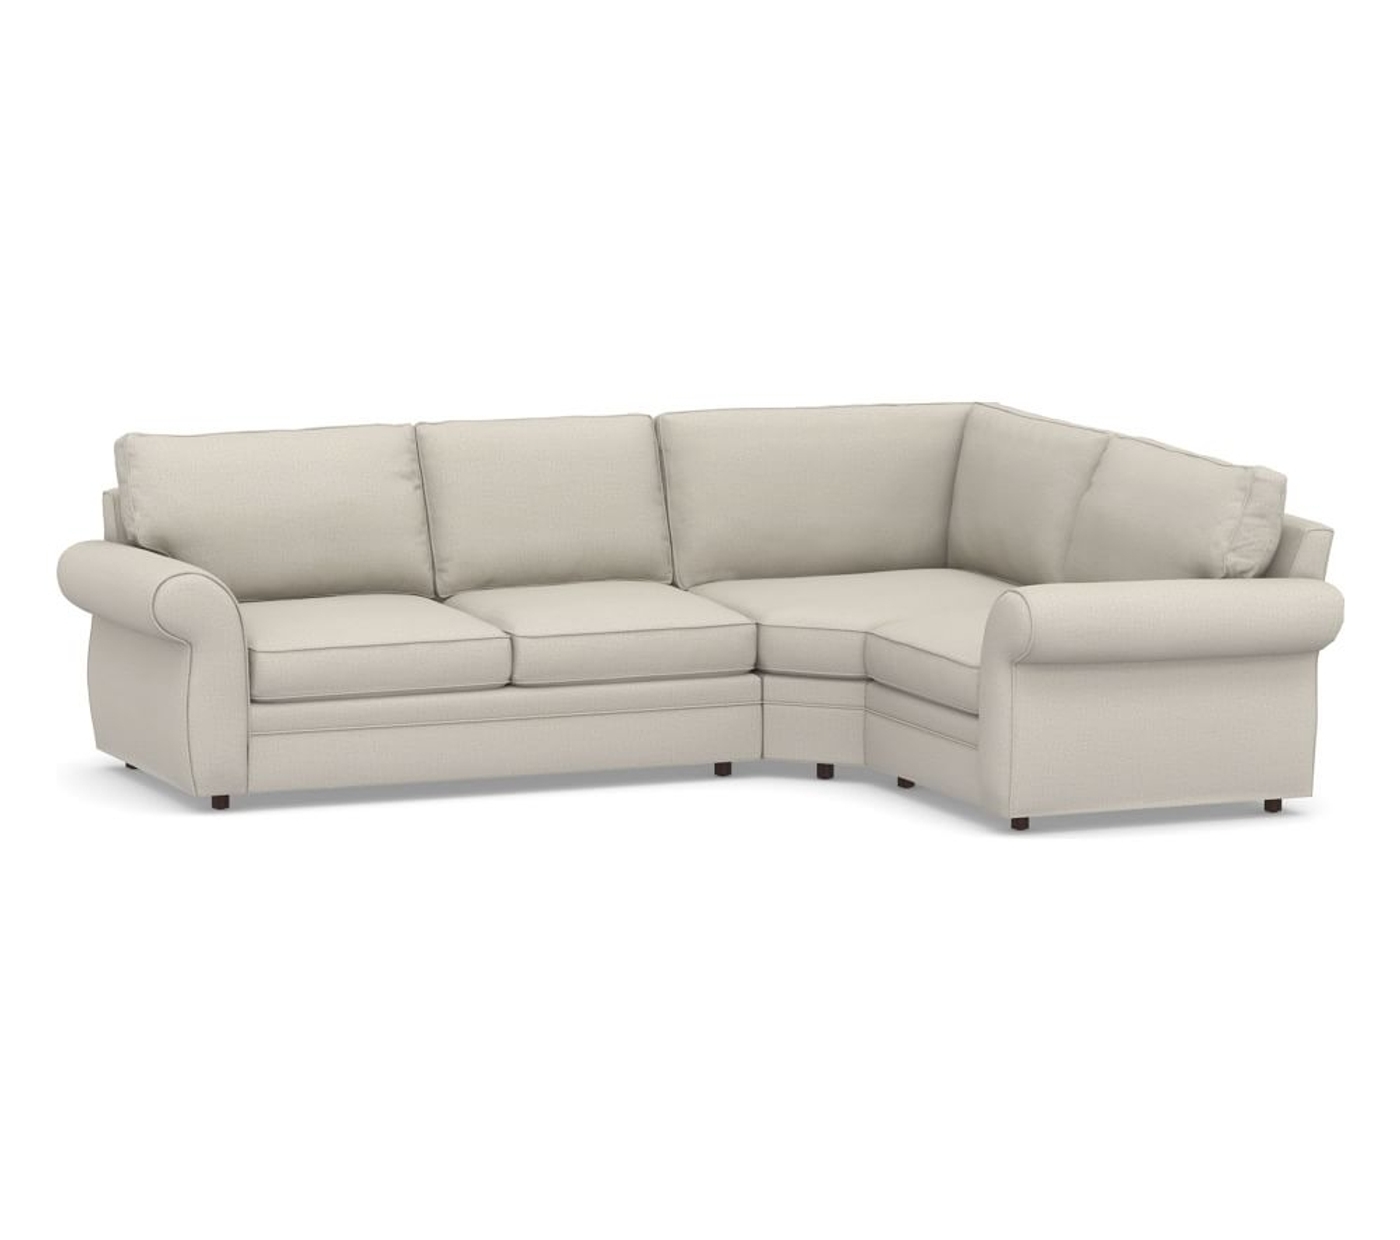 Pearce Roll Arm Upholstered 3 Piece